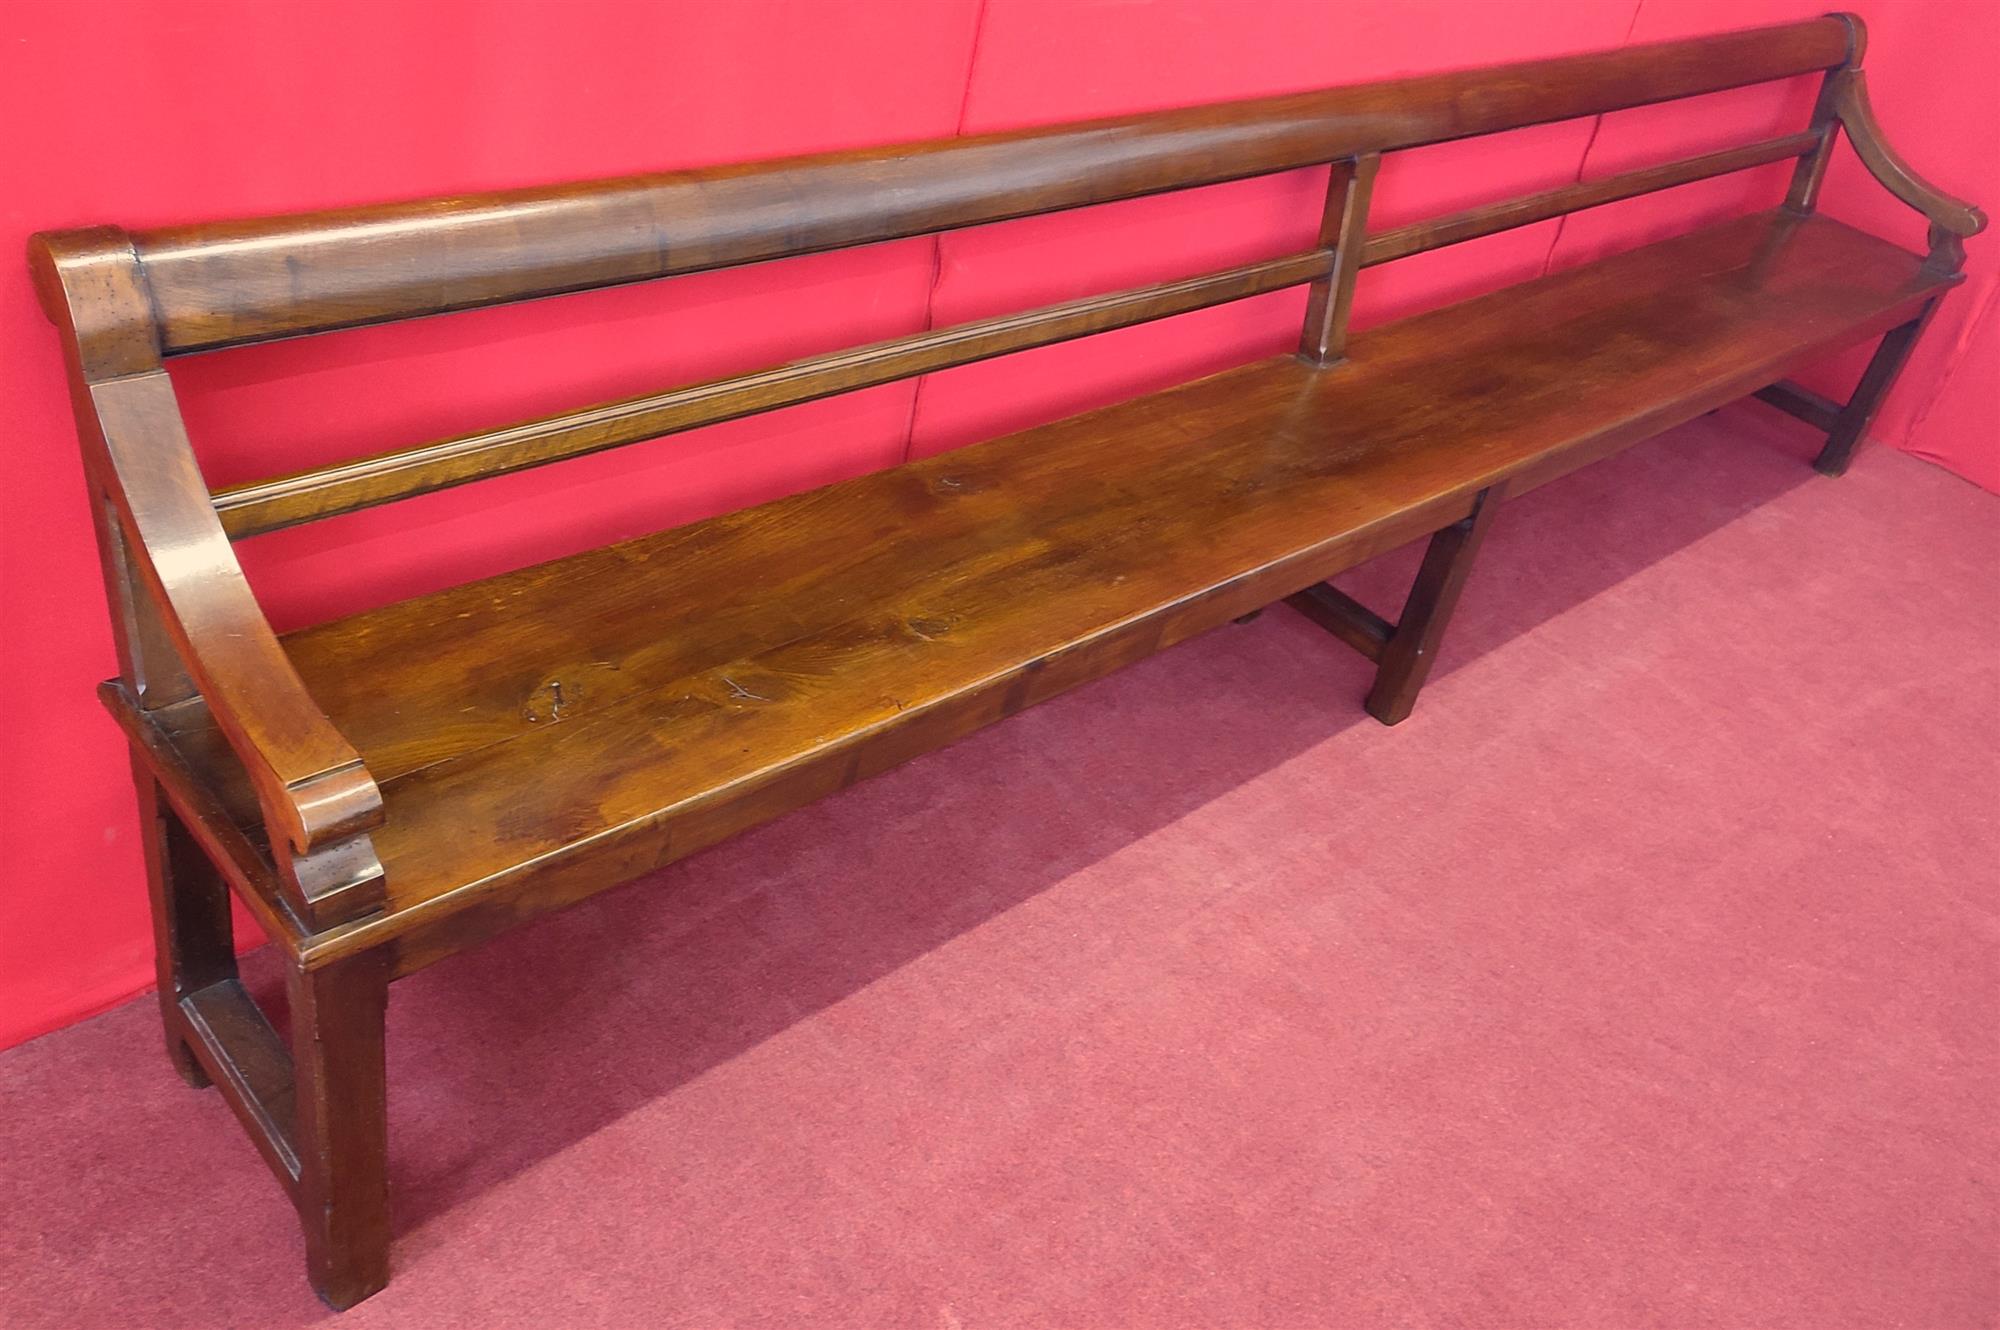 Long bench with armrests